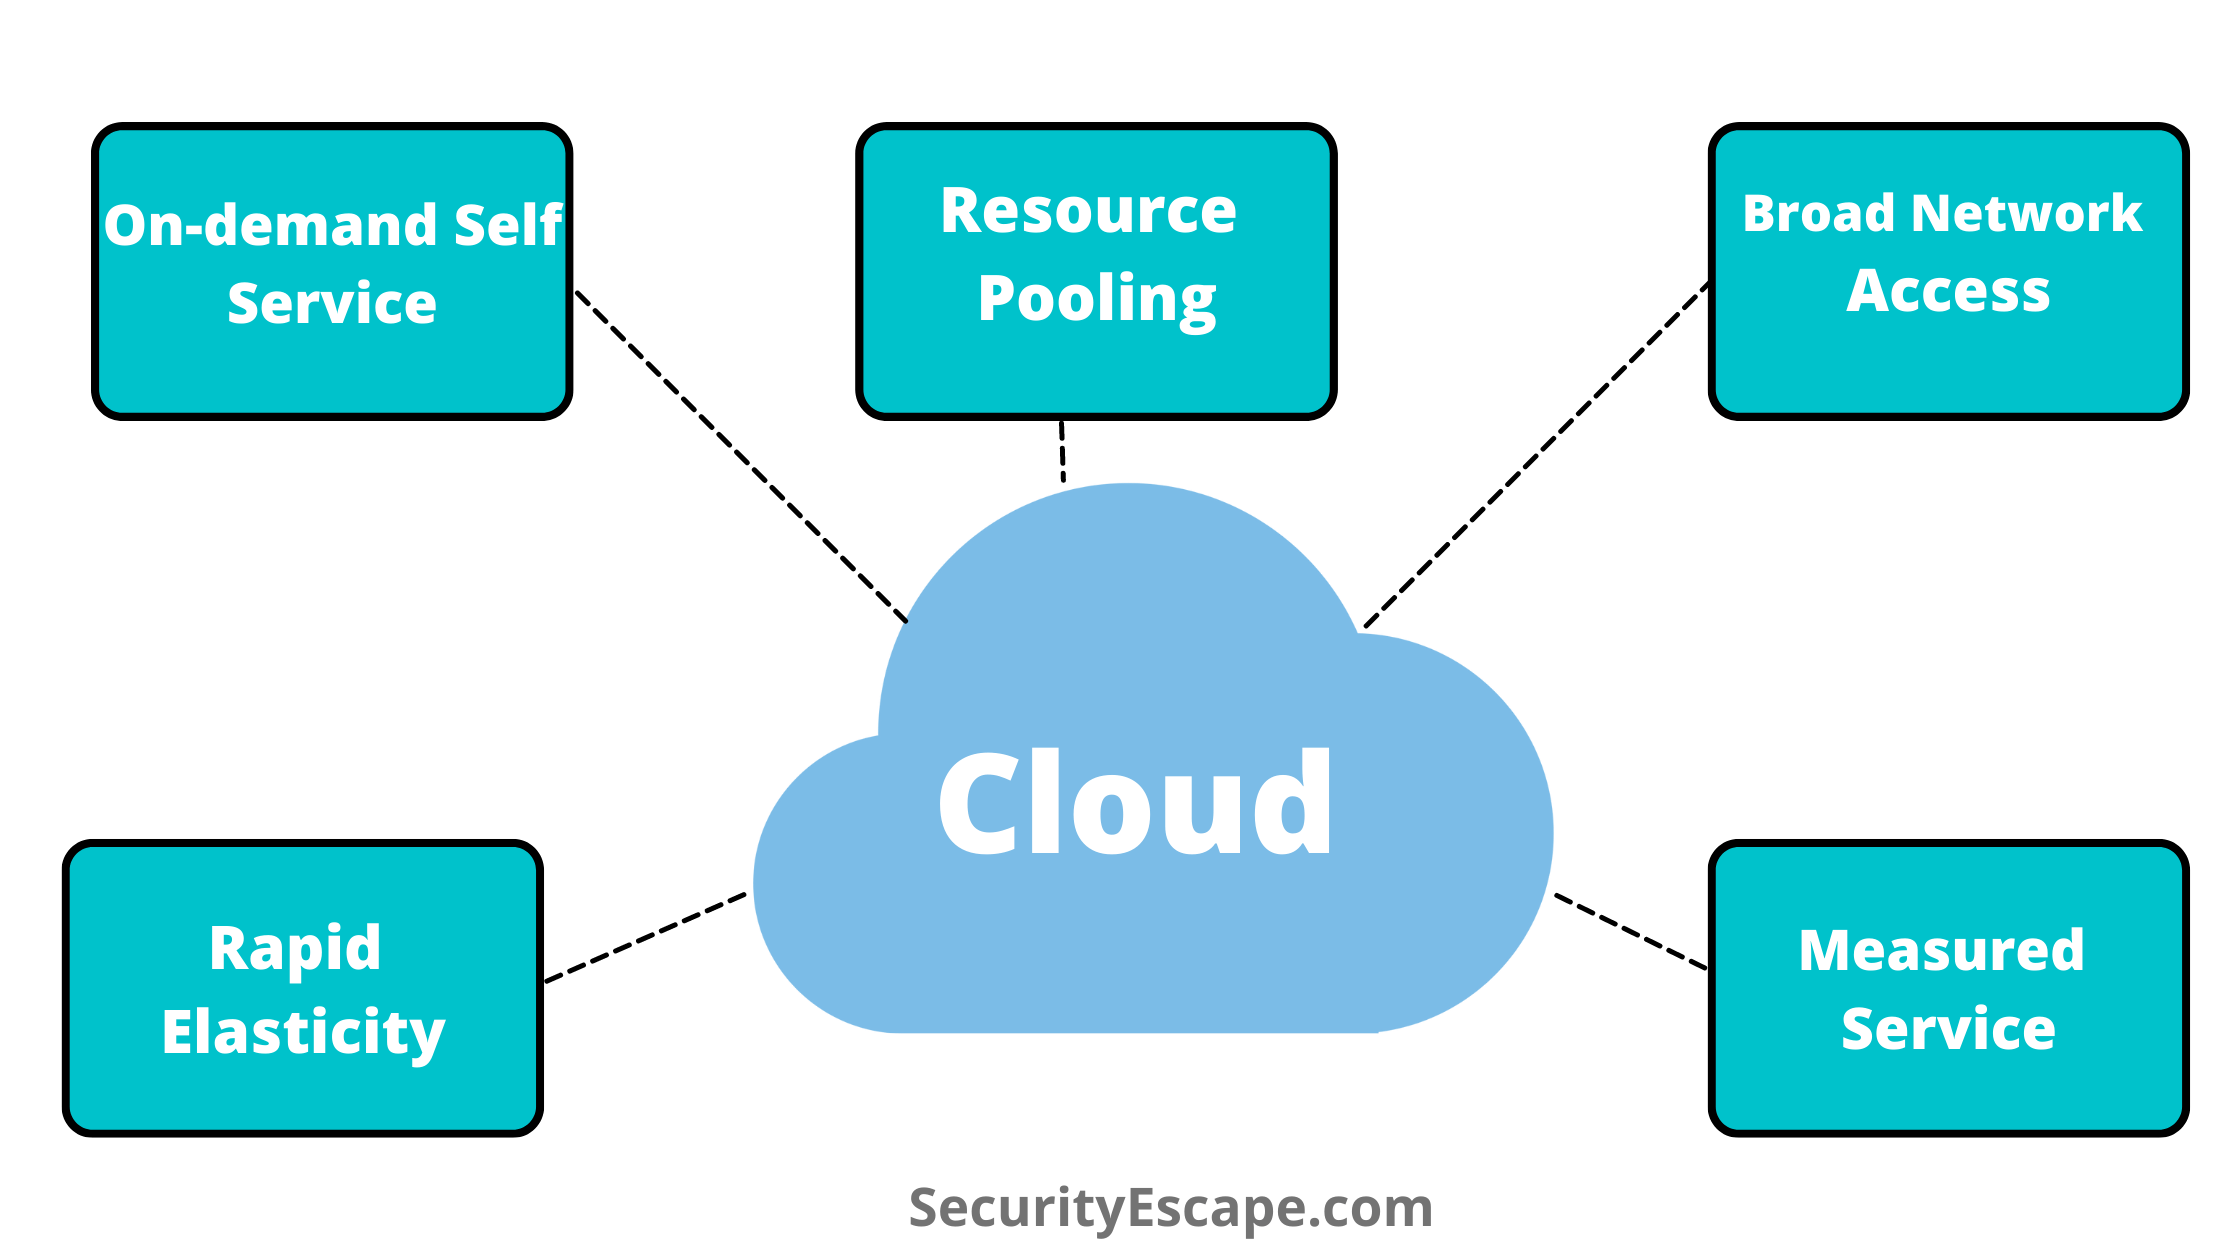 Which Statement Describes a Characteristic of Cloud Computing